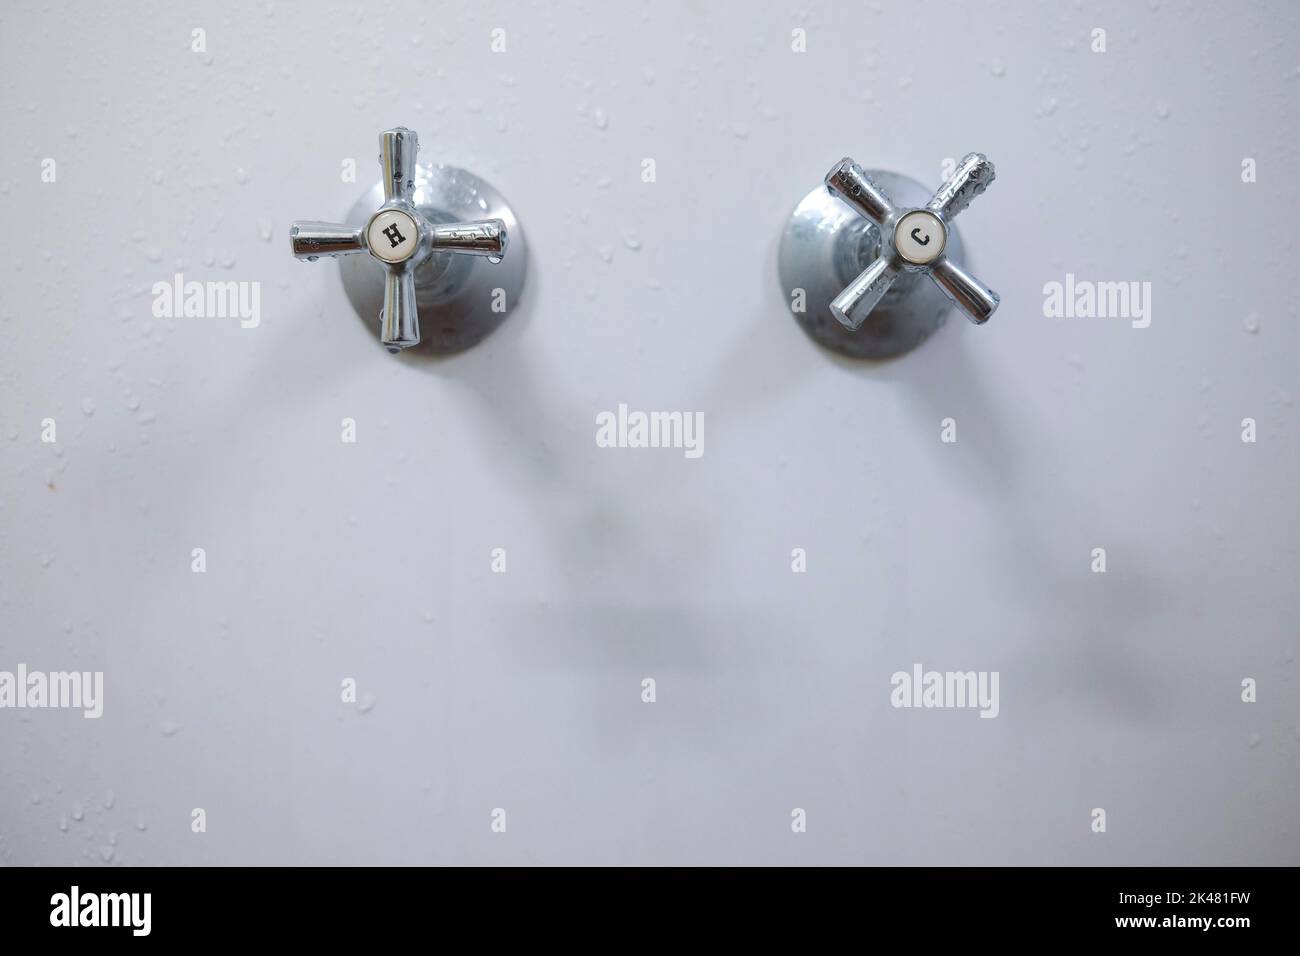 hot and cold bathroom wall faucets Stock Photo